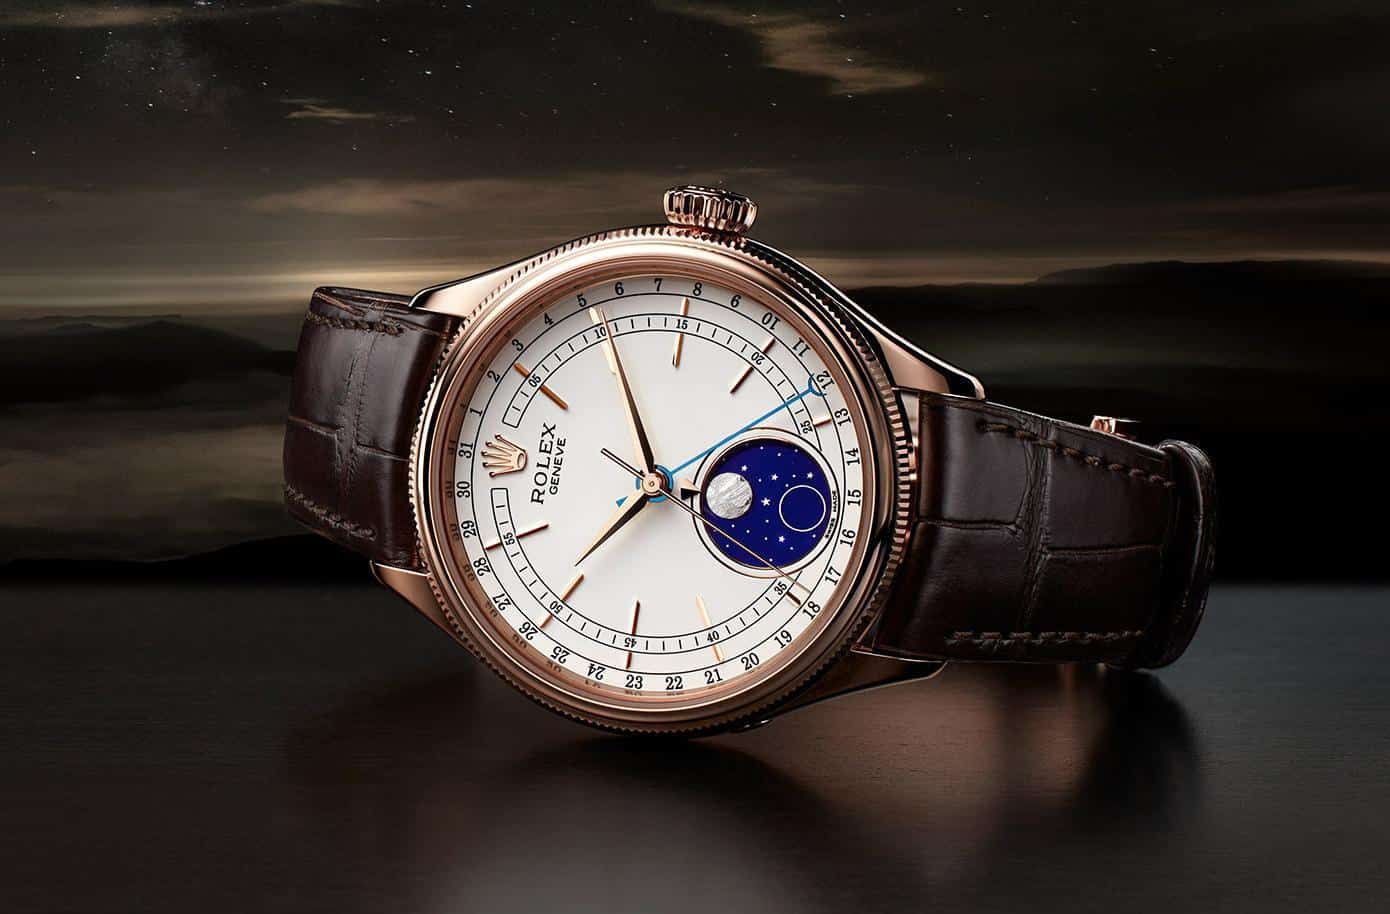 What is a moonphase watch